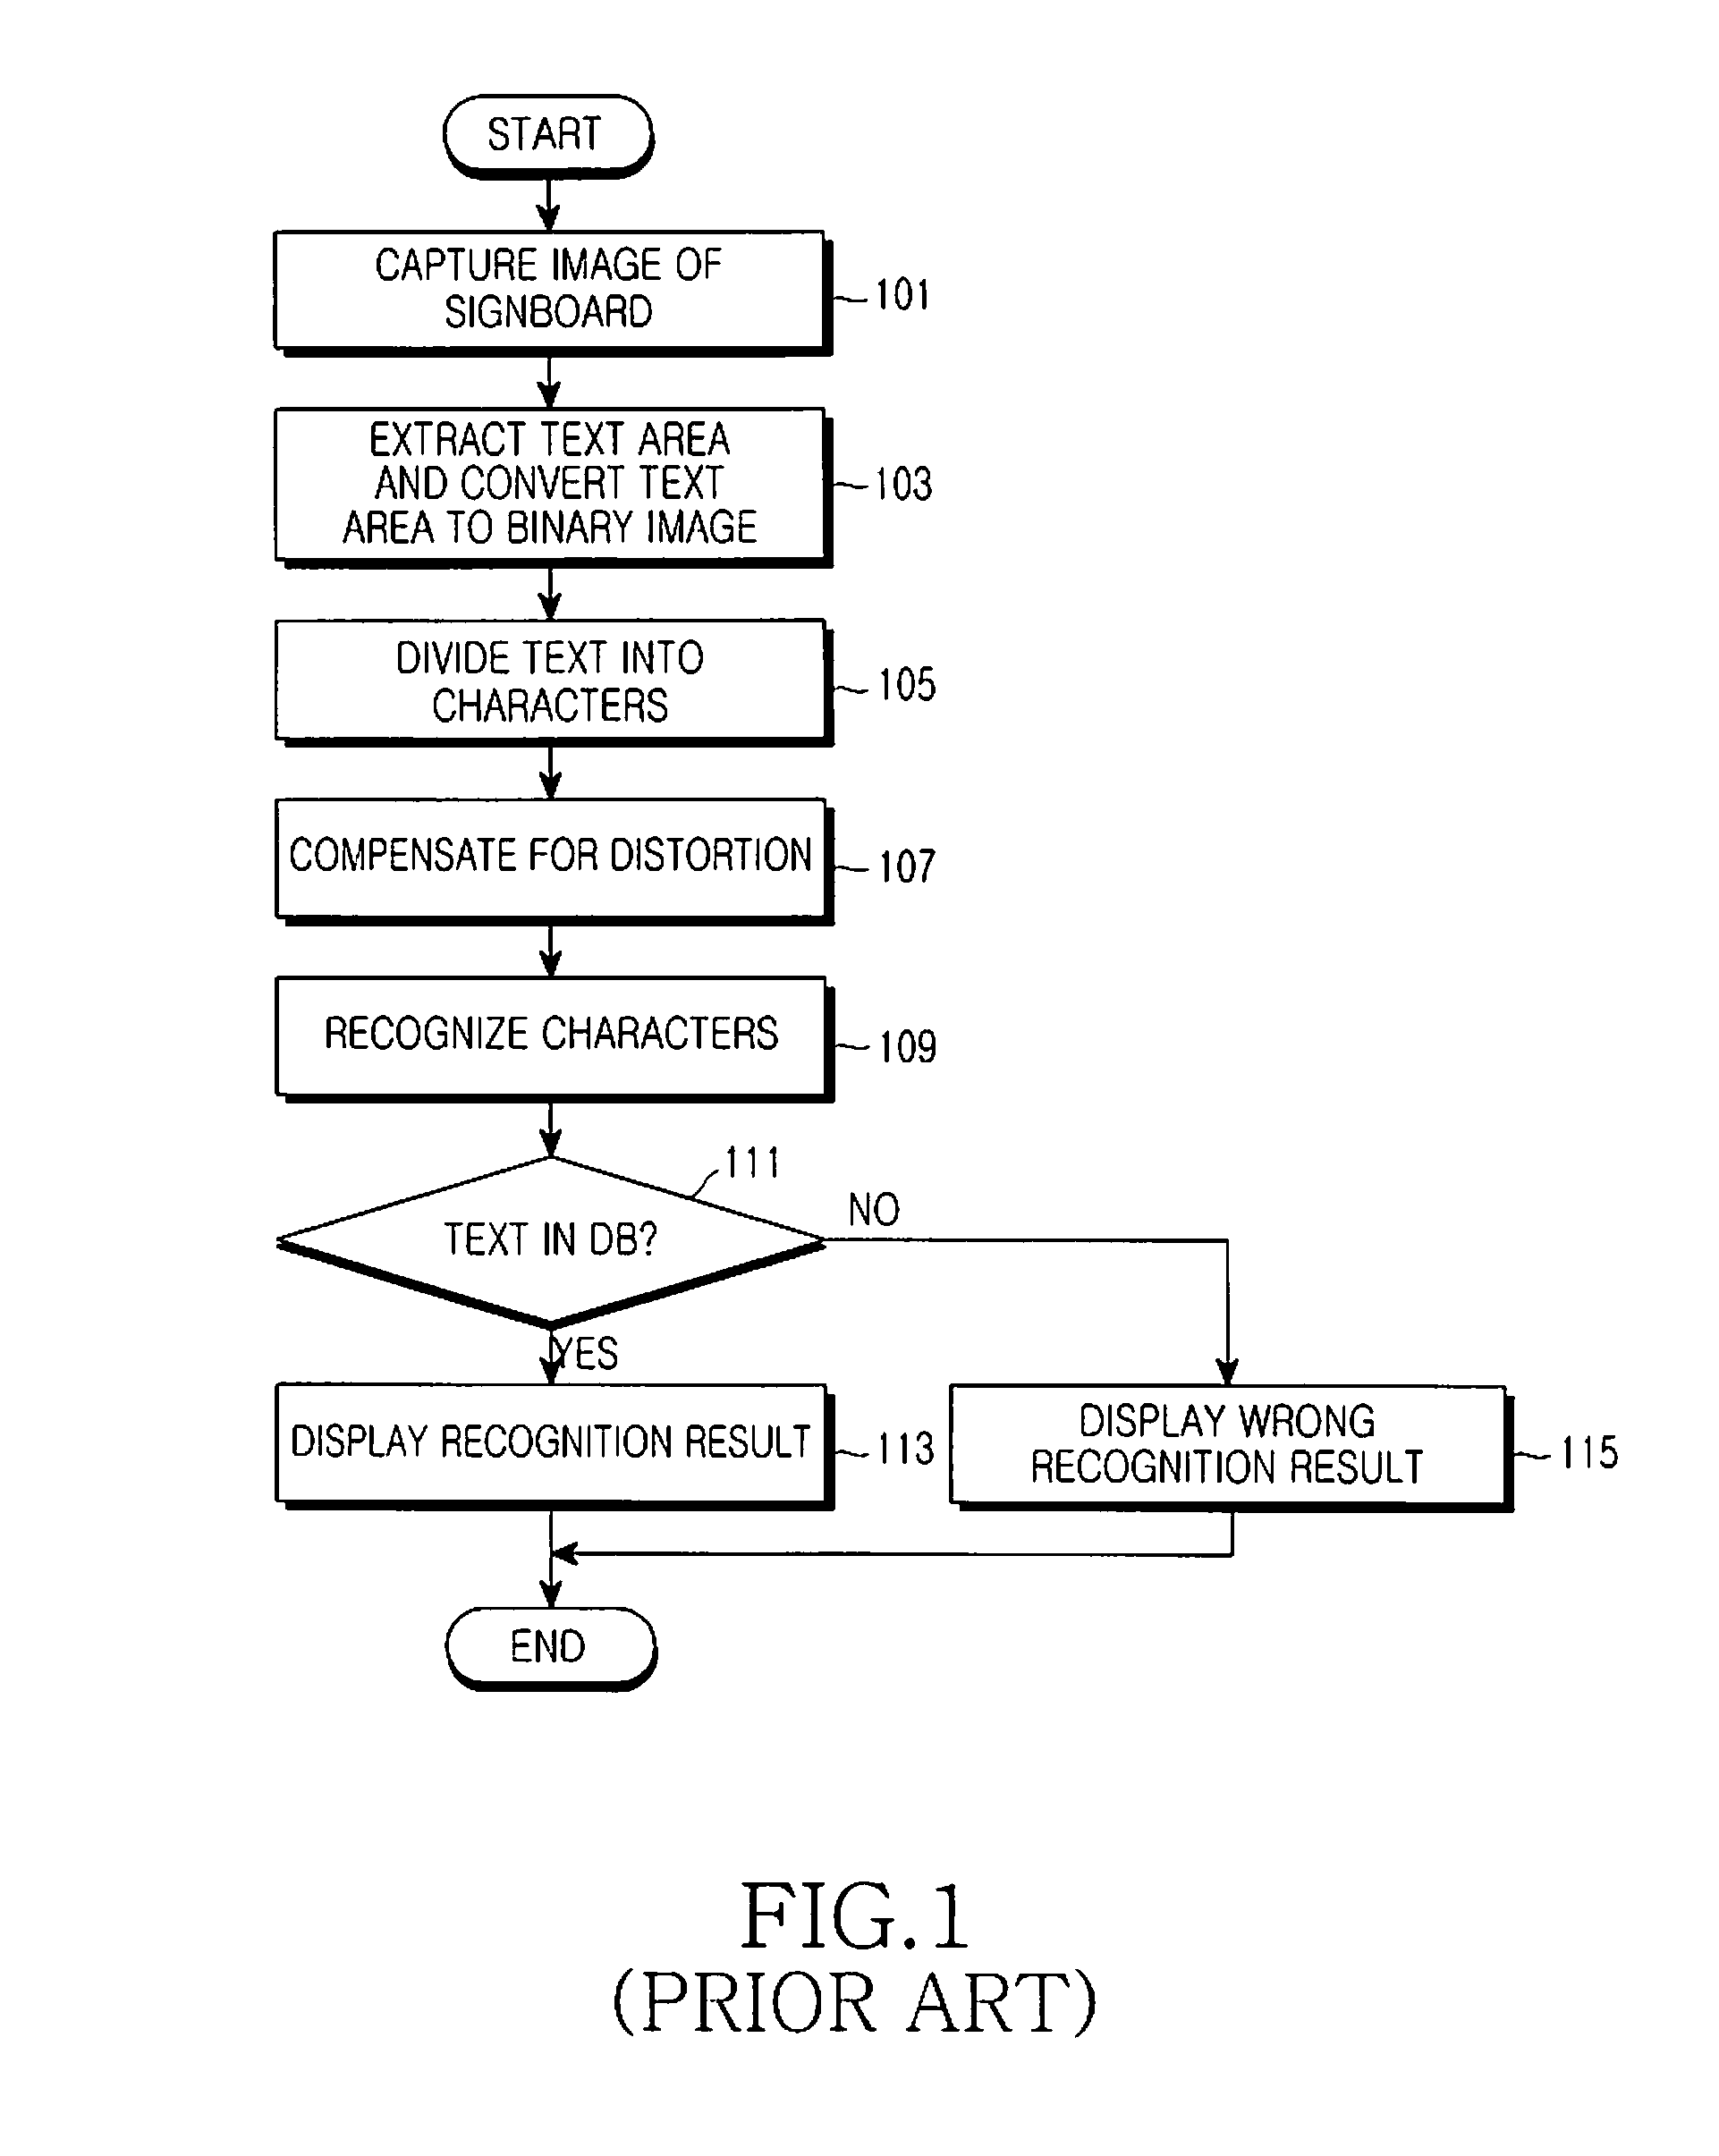 Apparatus and method for recognizing characters using a camera